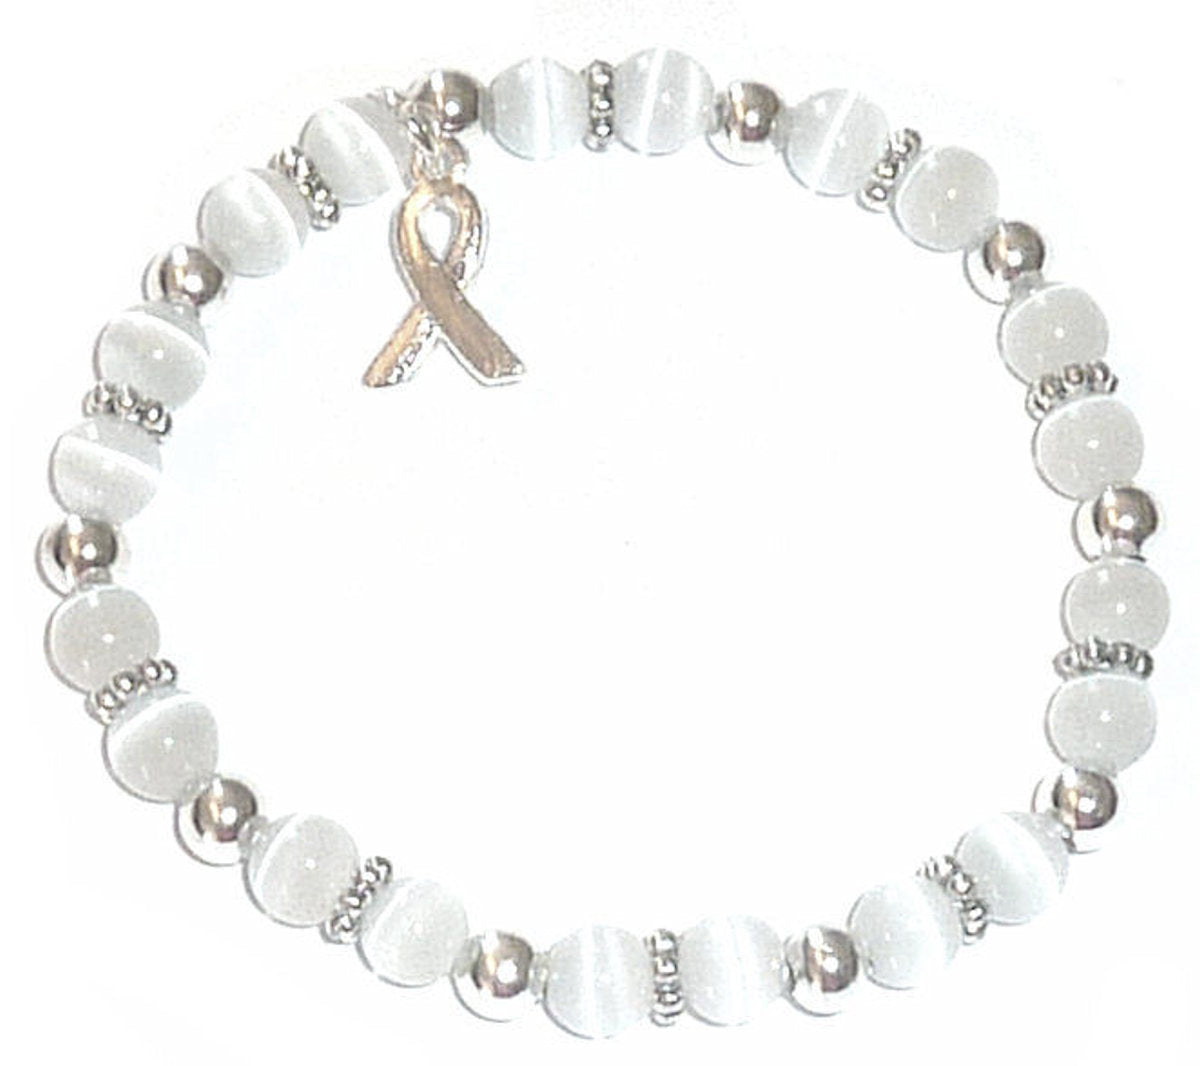 White (Cervical, Bone &amp; Retinoblastoma) Packaged Cancer Awareness Bracelet 6mm - Stretch (will stretch to fit most Adults)